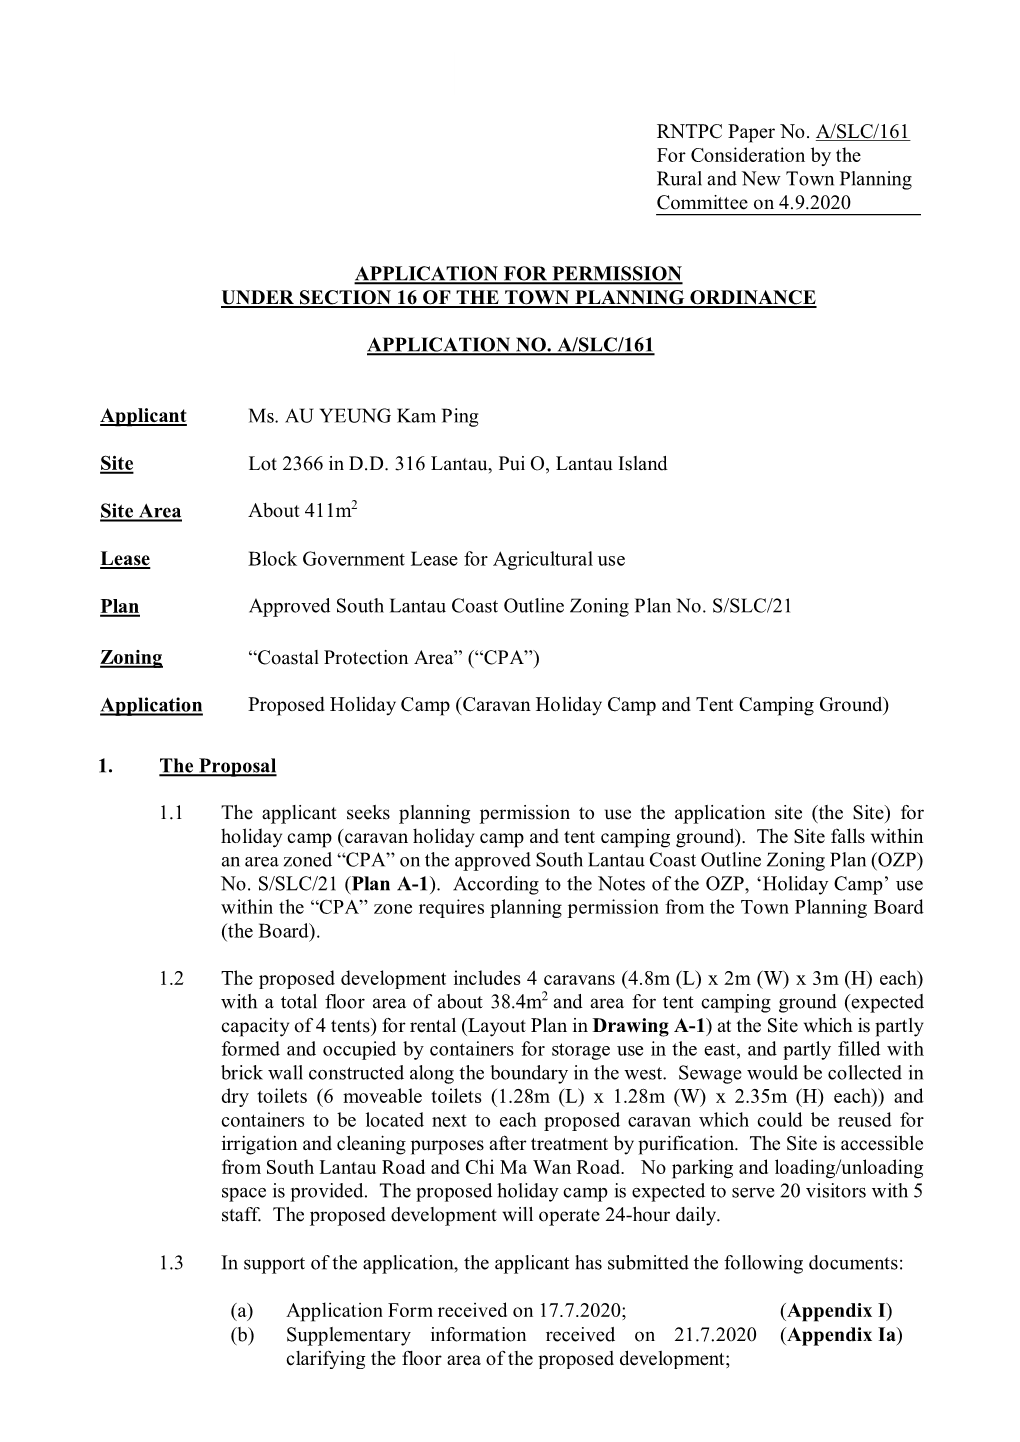 RNTPC Paper No. A/SLC/161 for Consideration by the Rural and New Town Planning Committee on 4.9.2020